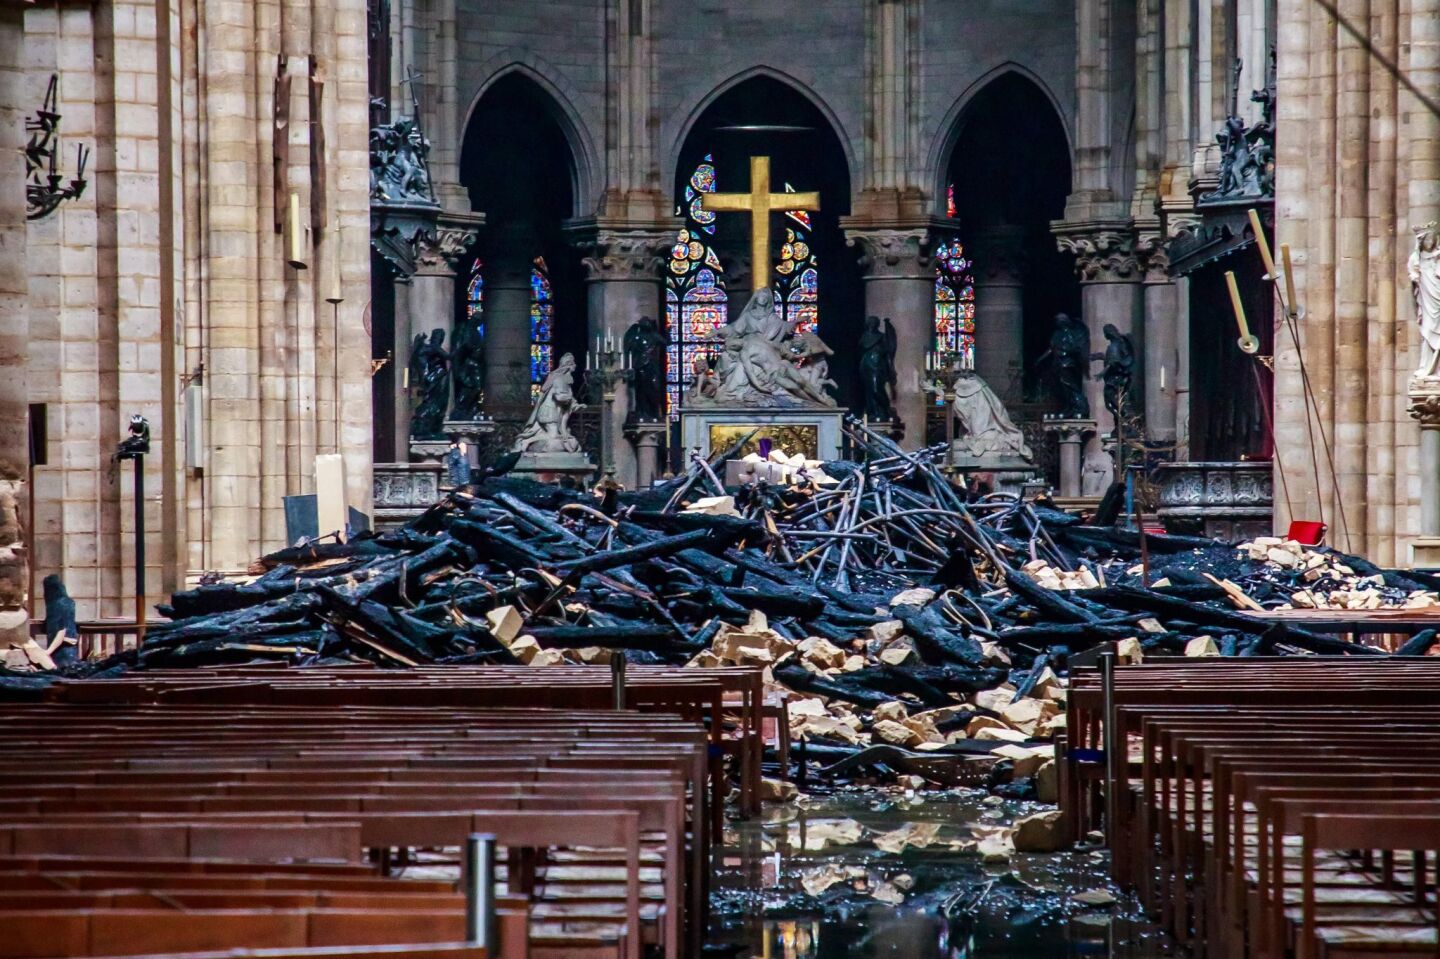 Debris fills the interior of the cathedral following a 12-hour firefight.